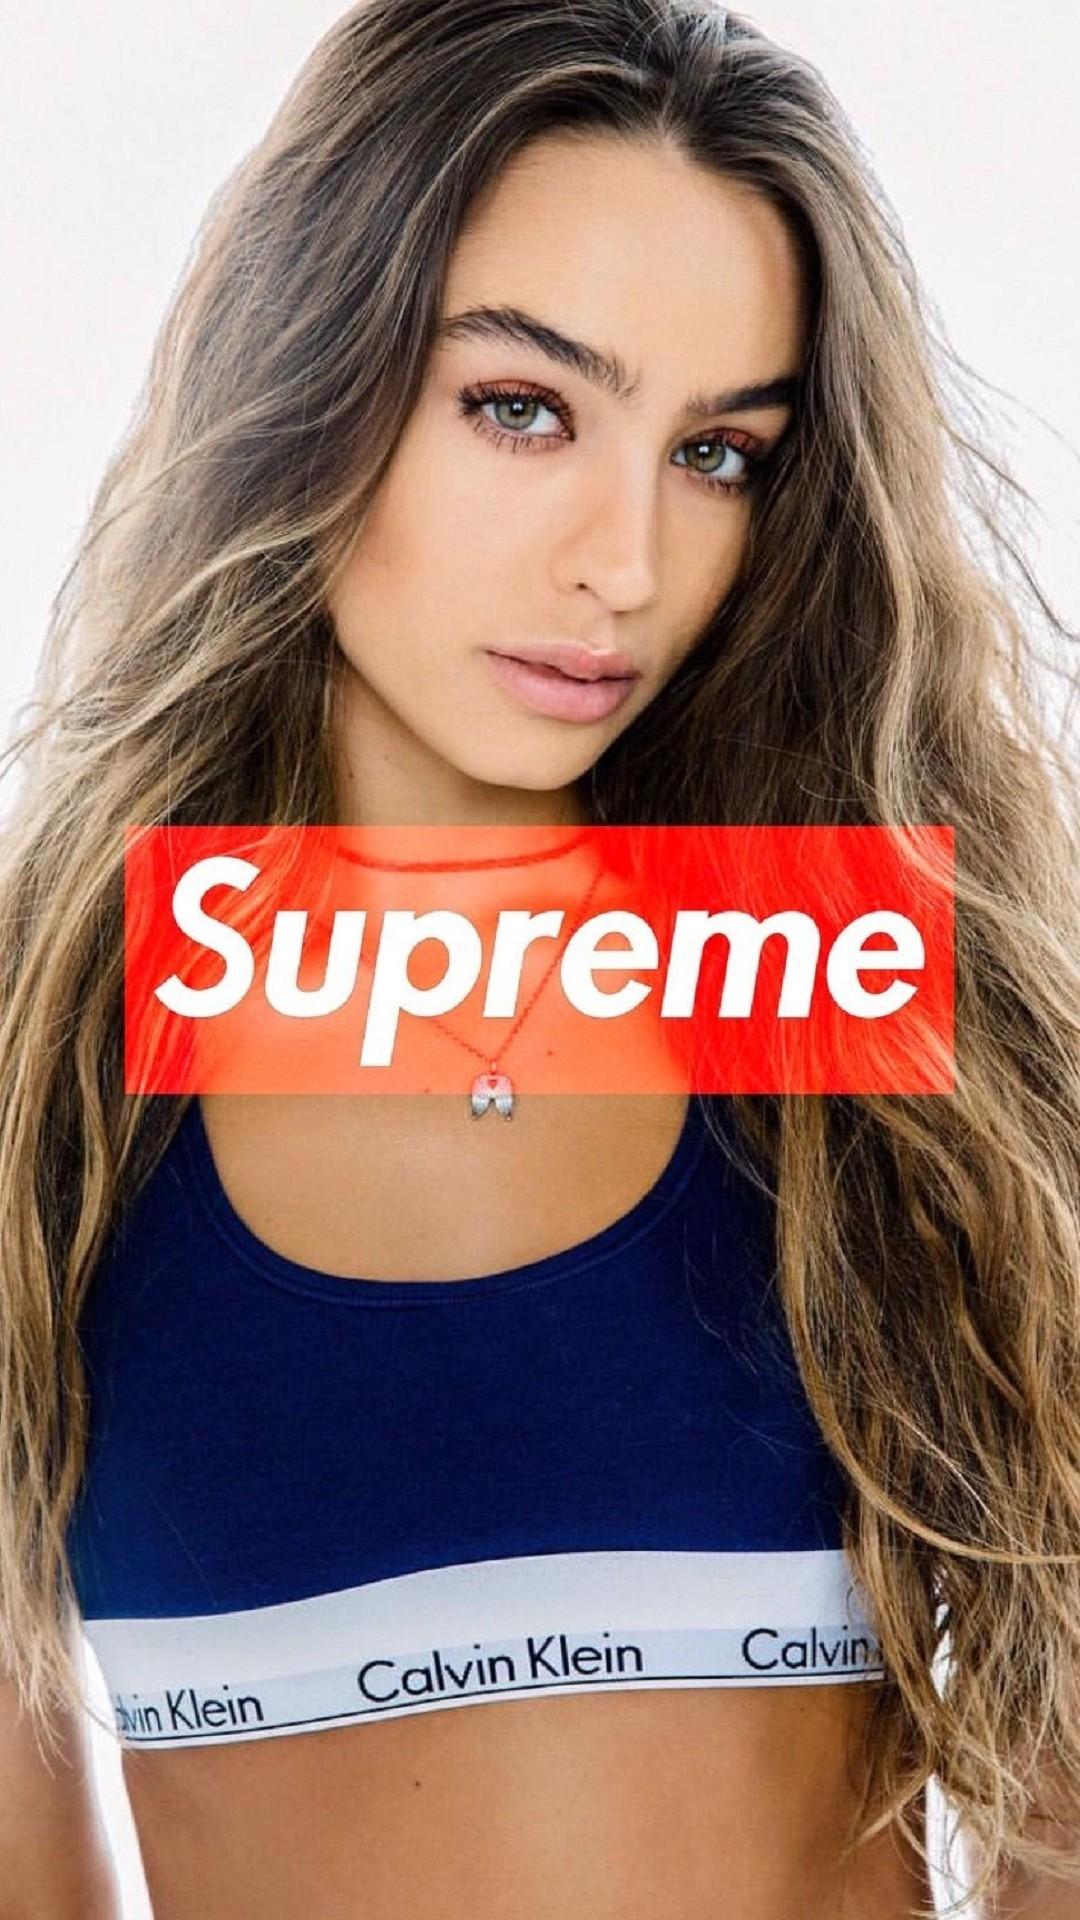 Supreme Live Wallpaper Girl - Wall.GiftWatches.CO